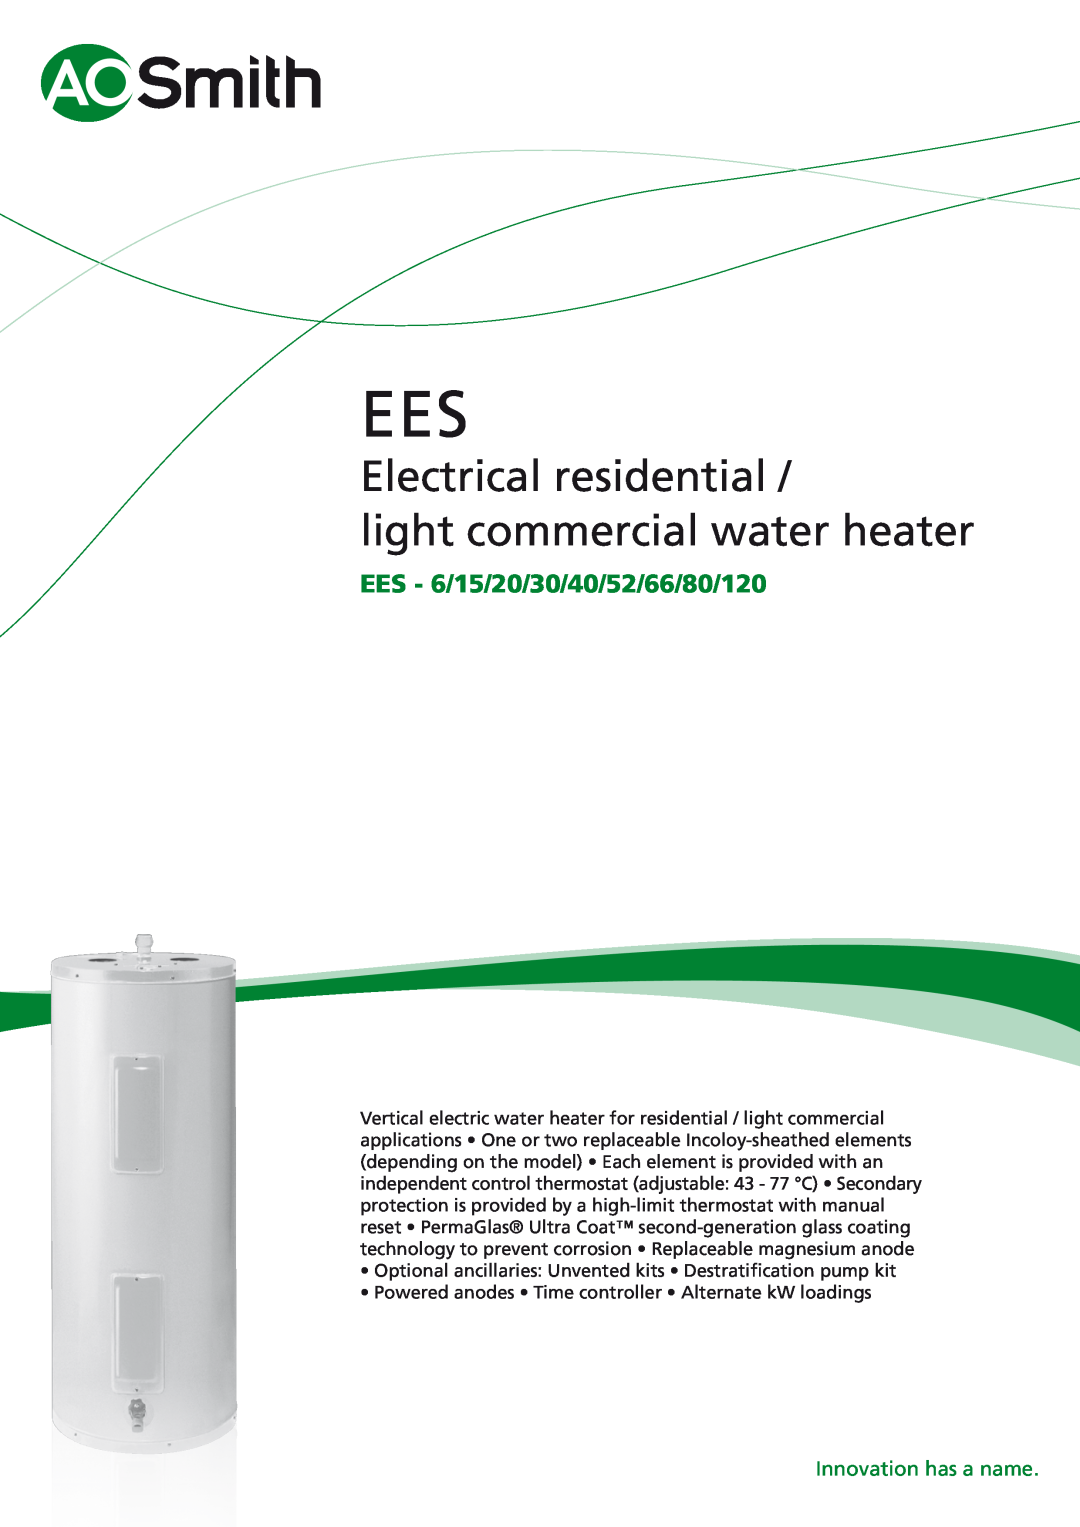 A.O. Smith EES - 15 manual Electrical residential light commercial water heater, EES - 6/15/20/30/40/52/66/80/120 